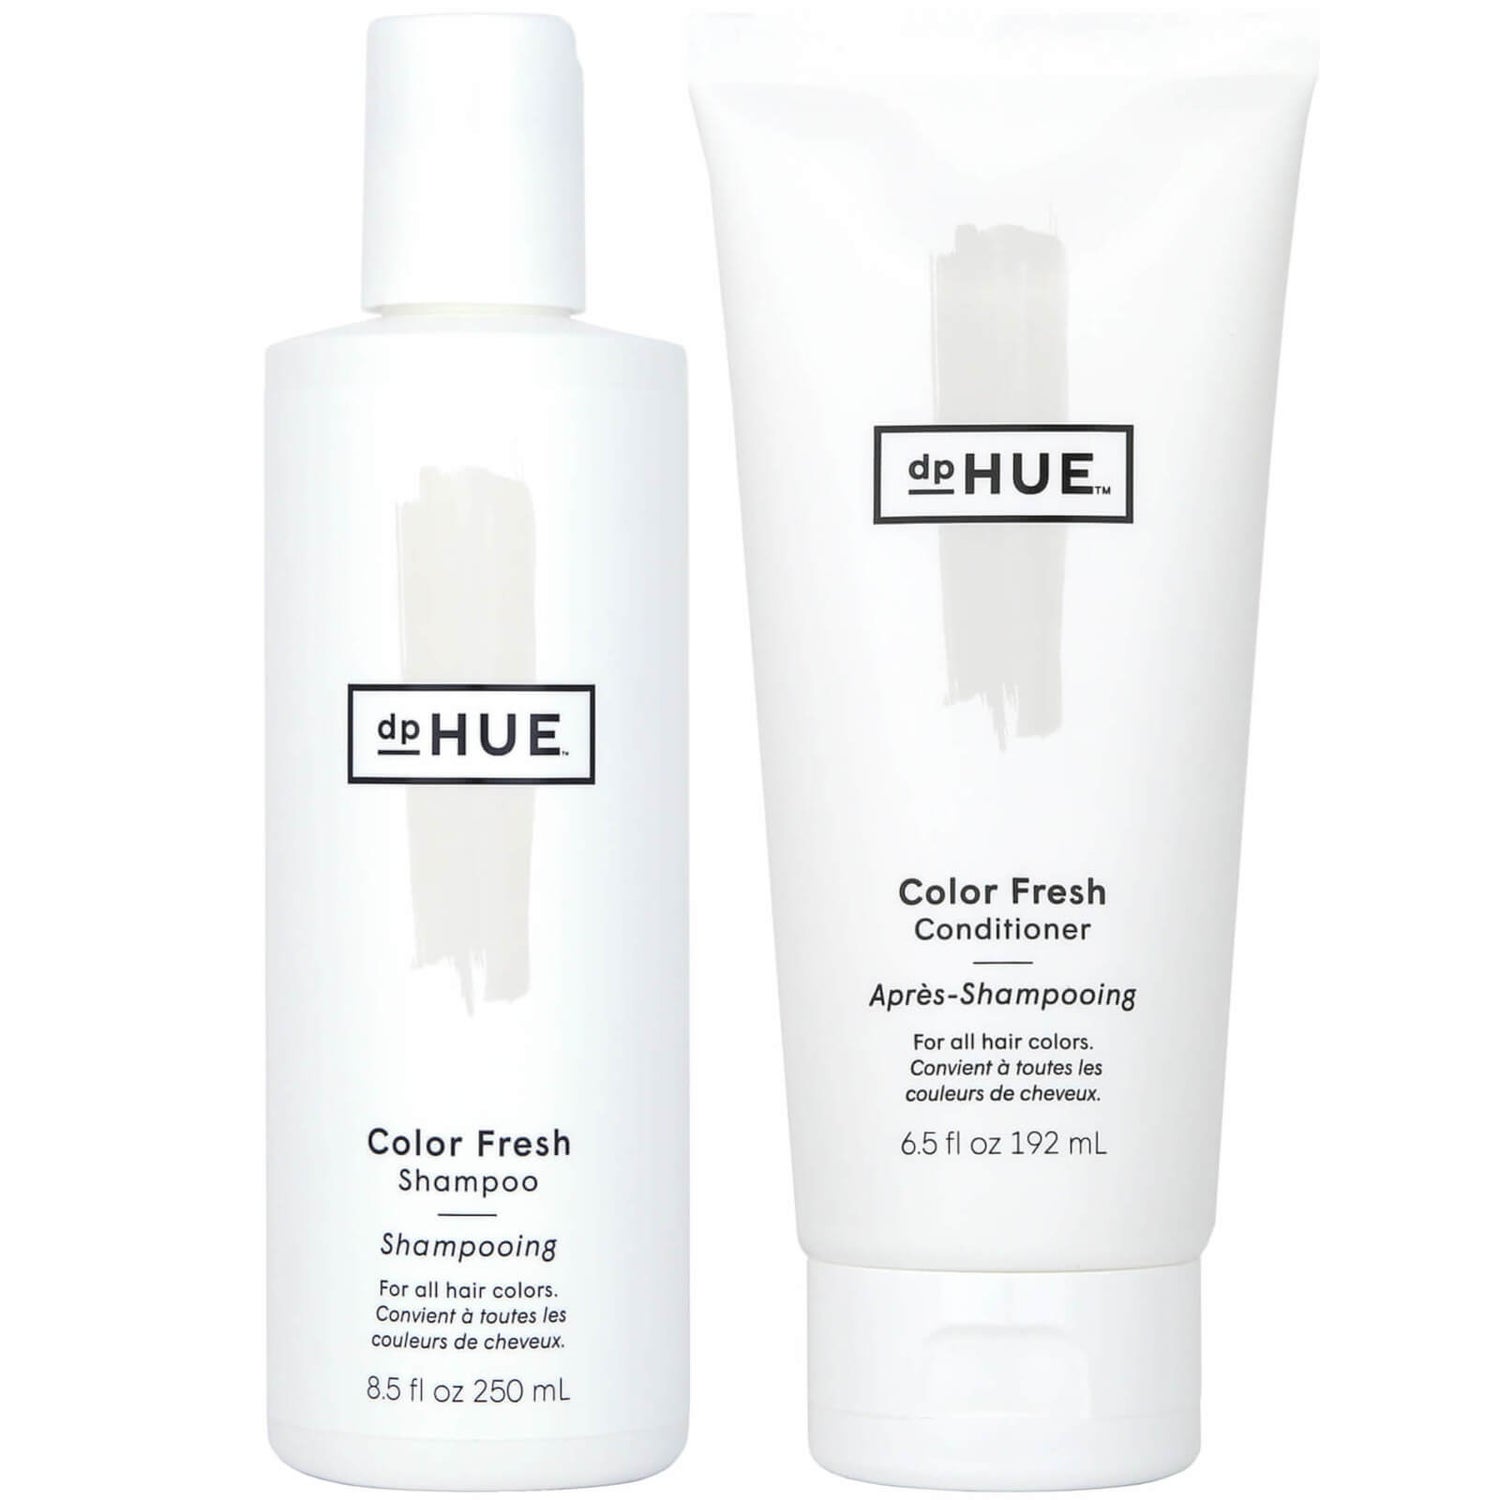 dpHUE Colour Fresh Shampoo and Conditioner Duo